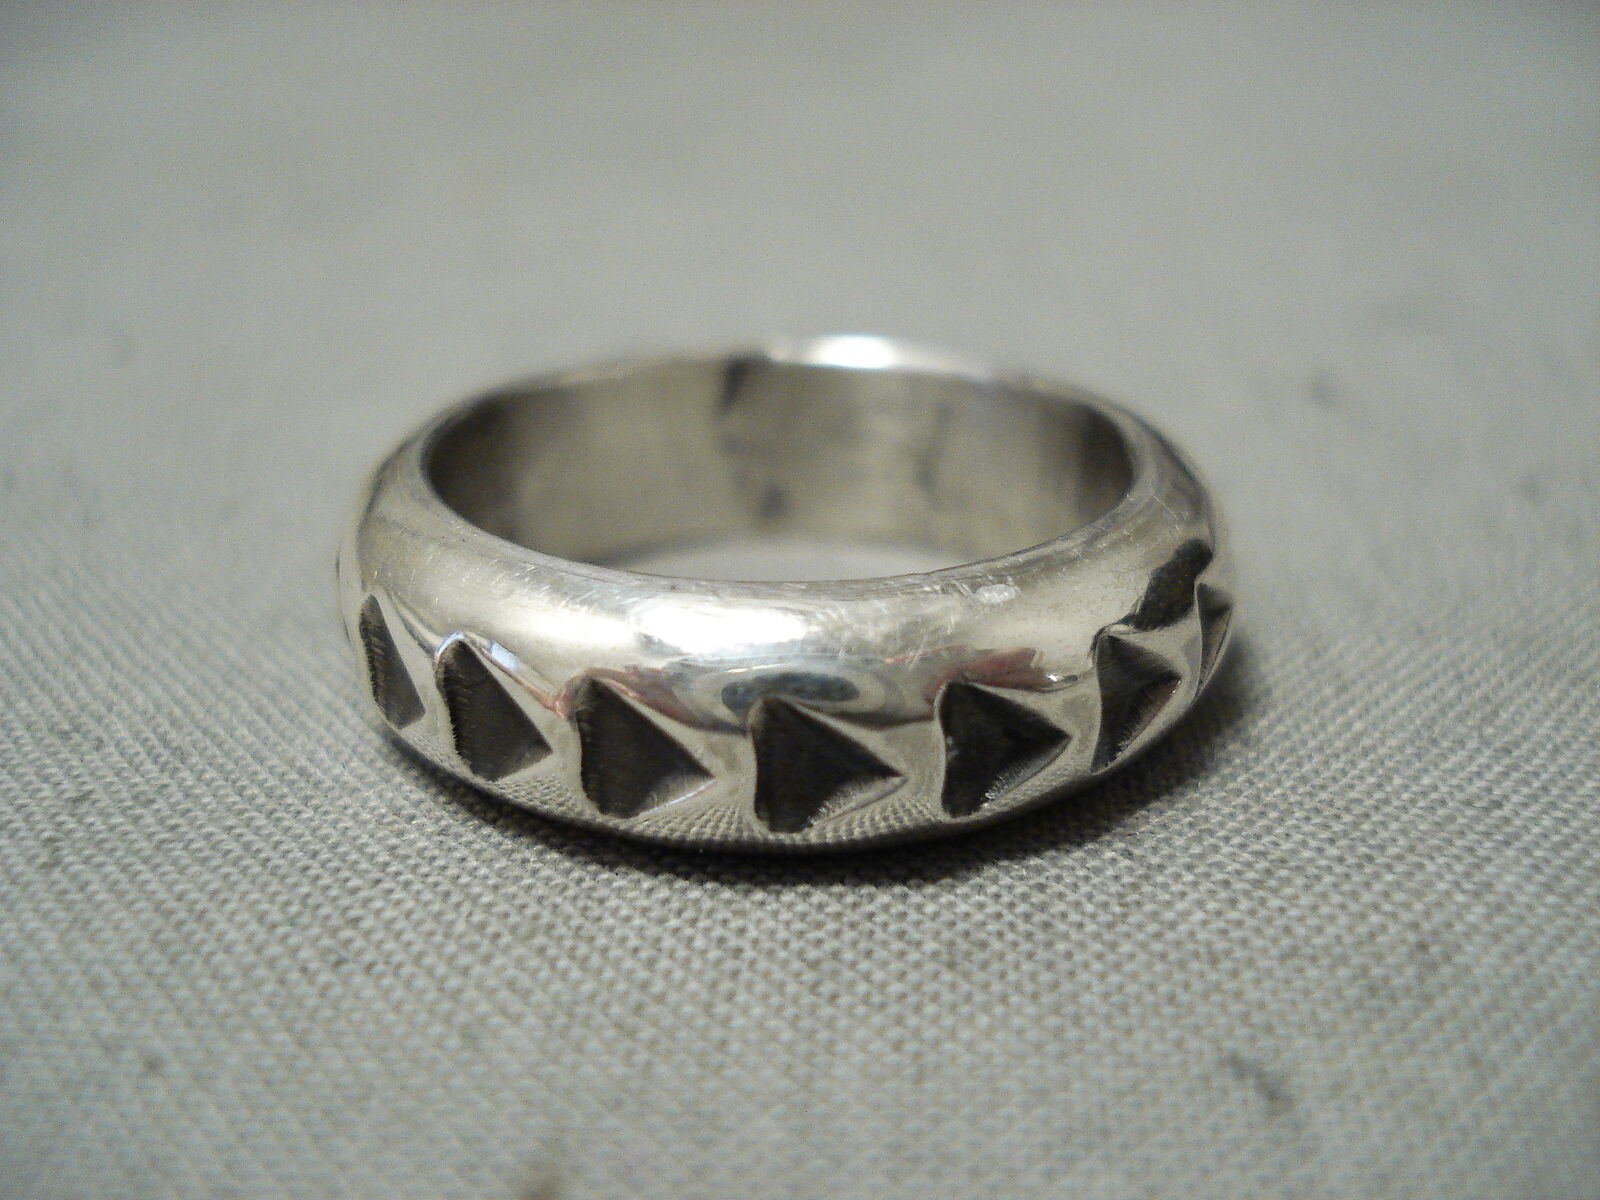 IMPORTANT SUNNY REEVES NAVAJO STERLING SILVER ARROWS RING NATIVE AMERICAN